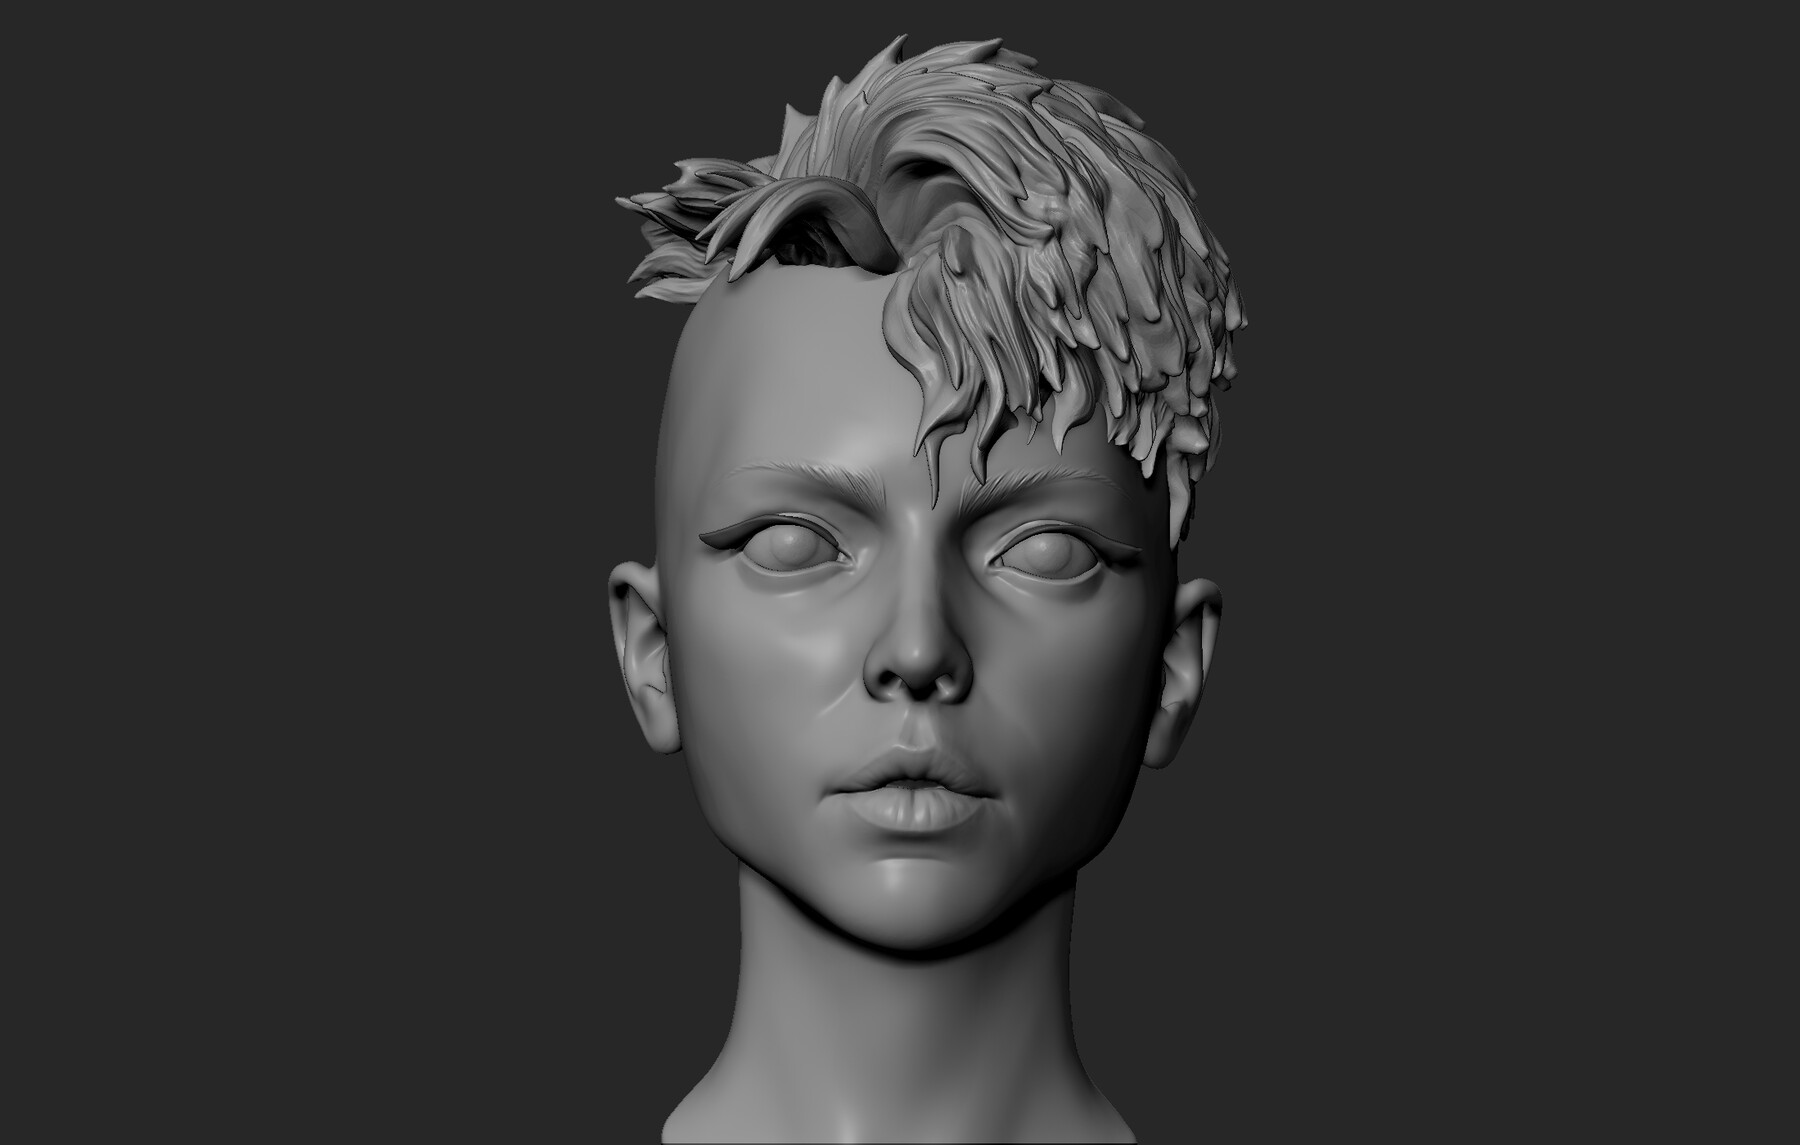 ArtStation - Female Head with Short Hair | Resources